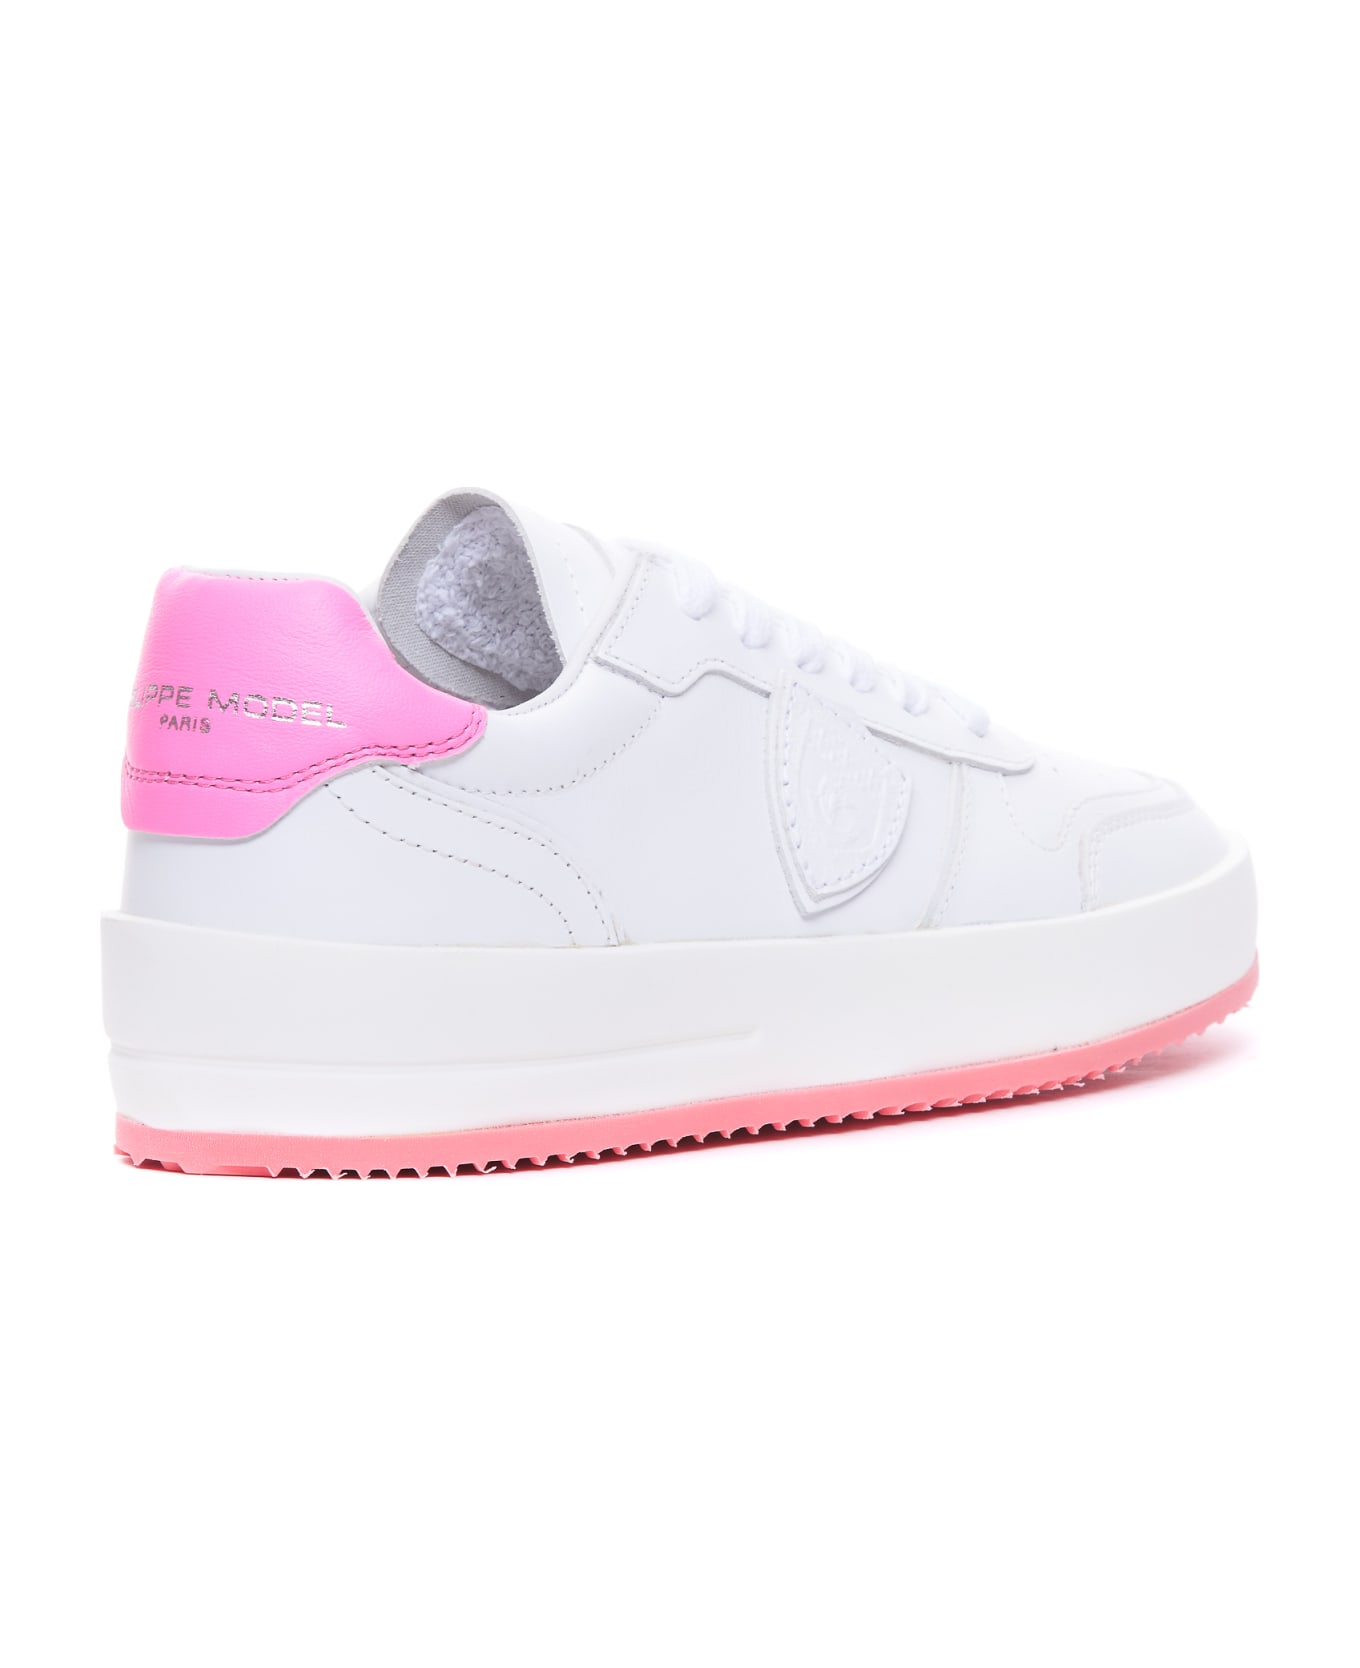 Philippe Model Nice Low Sneakers - Veau blanc/fucsia スニーカー